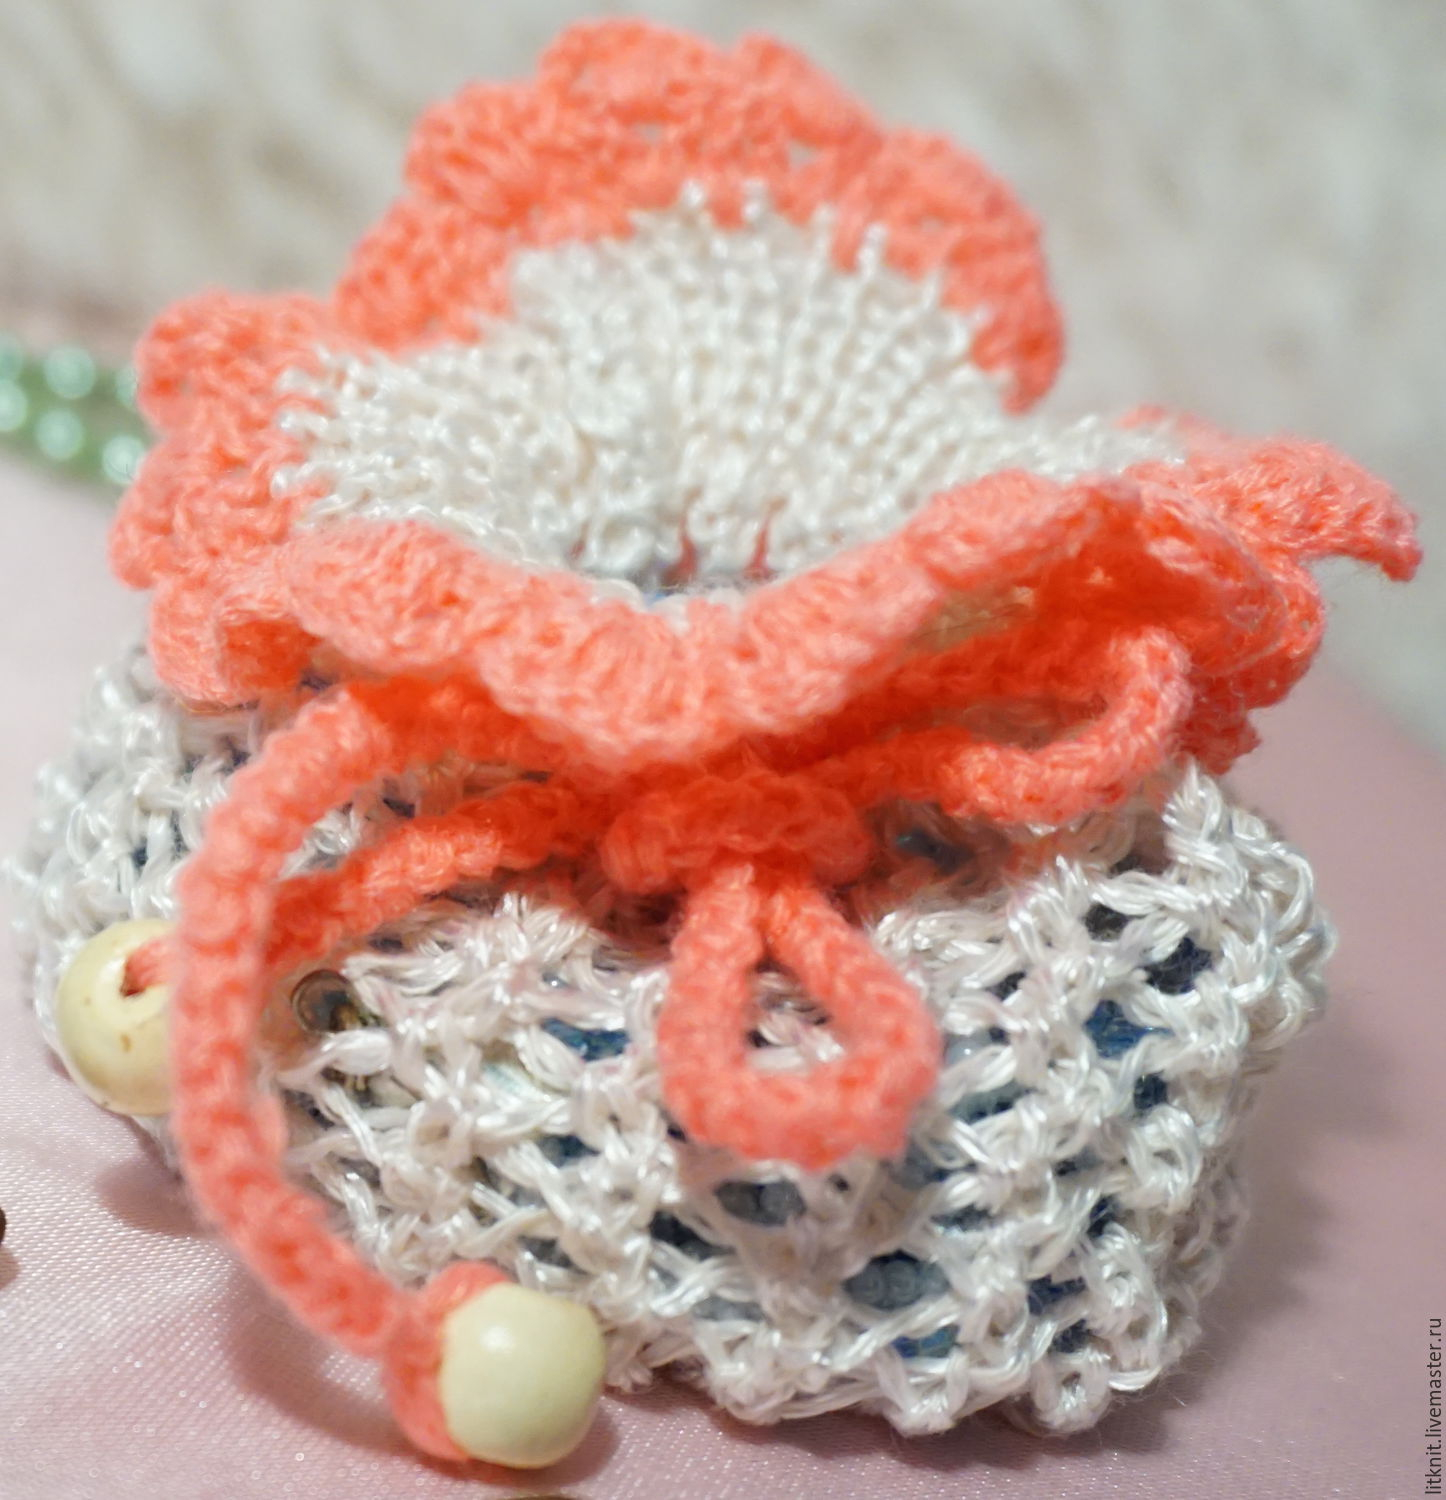 Knitted Sachet Pattern Pouch Sachet Knitted For Aromatic Needs Or For Storage Of Small Things Shop Online On Livemaster With Shipping 9y6tzcom Moscow